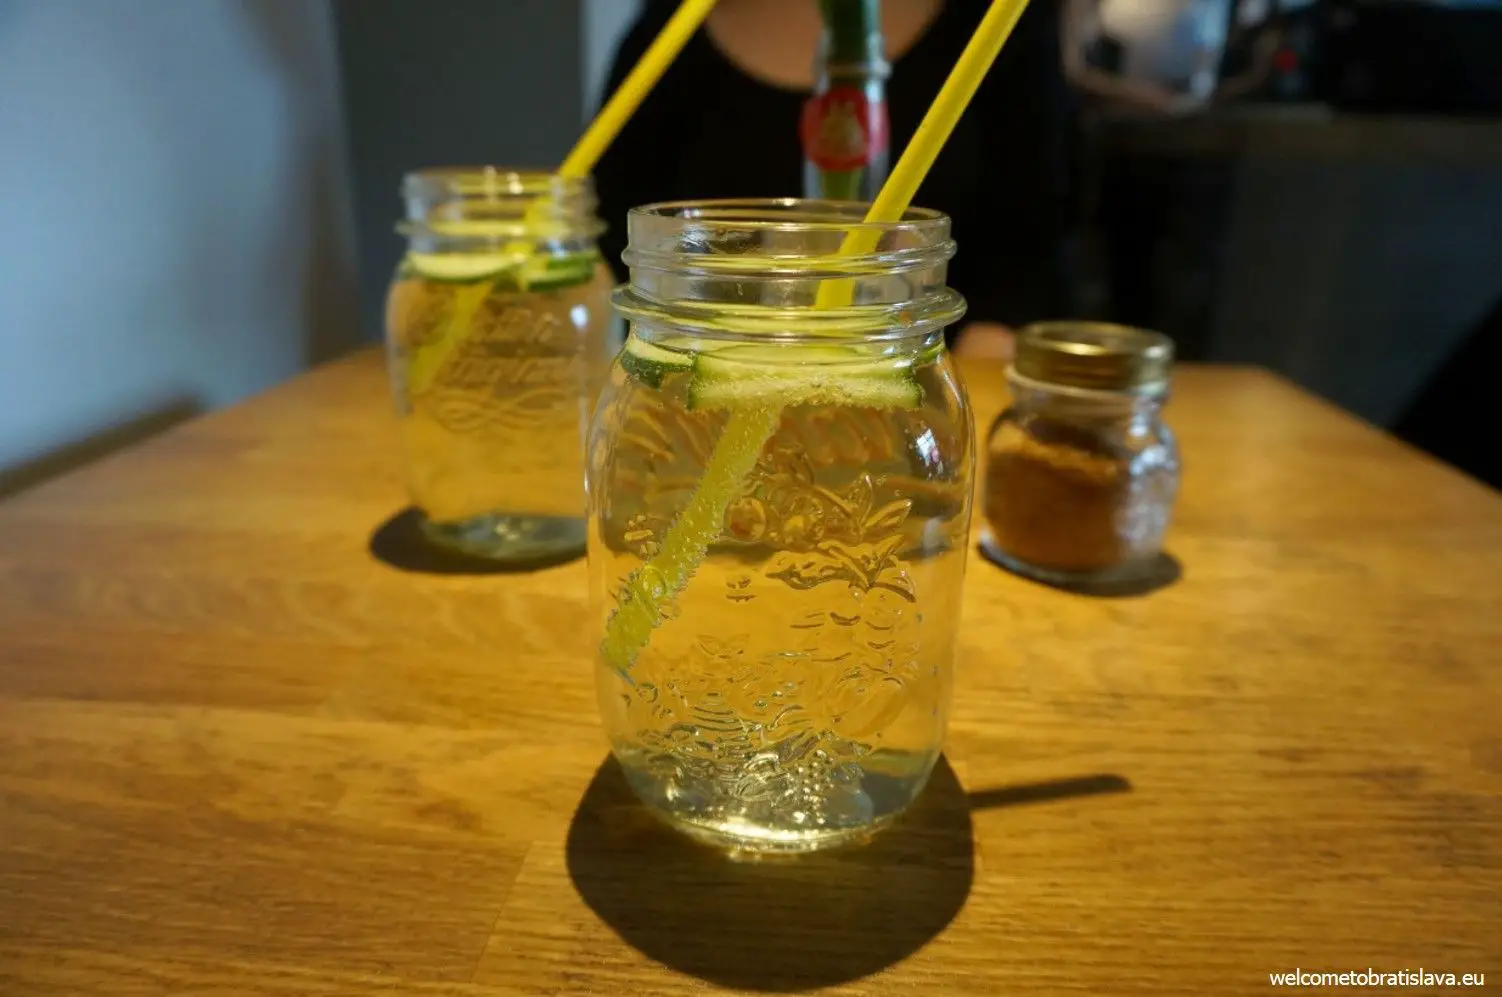 If you decide to pay a visit to SOHO, make sure you try their lemonades. 